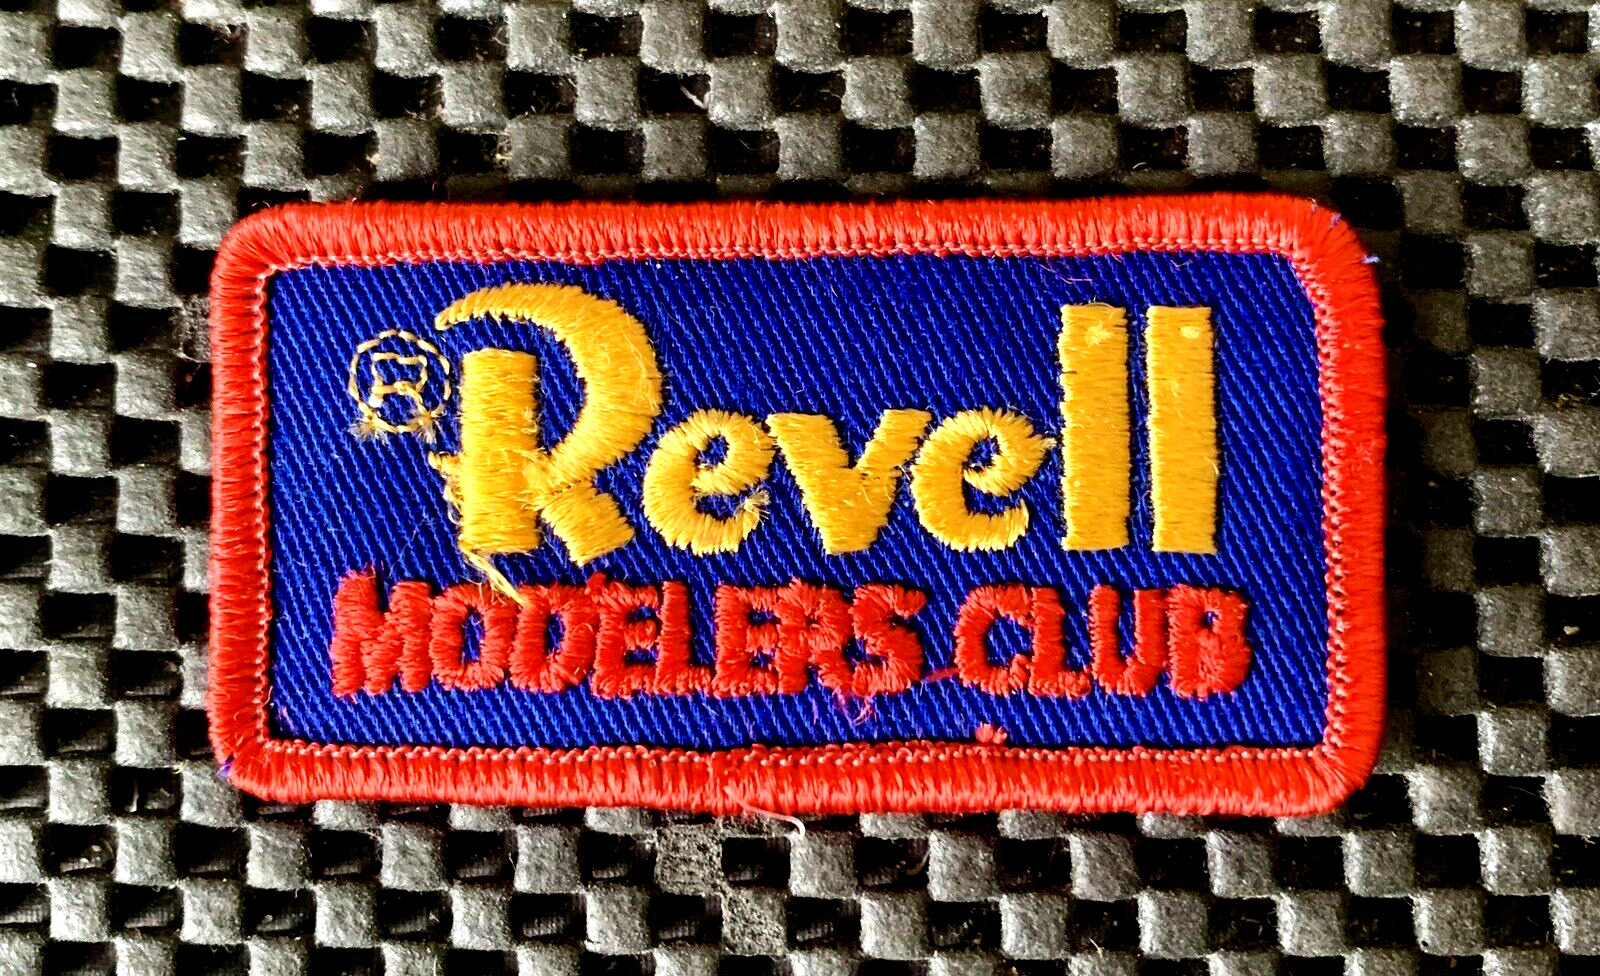 REVELL MODELERS CLUB EMBROIDERED SEW ON PATCH SCALE MODELS 3\